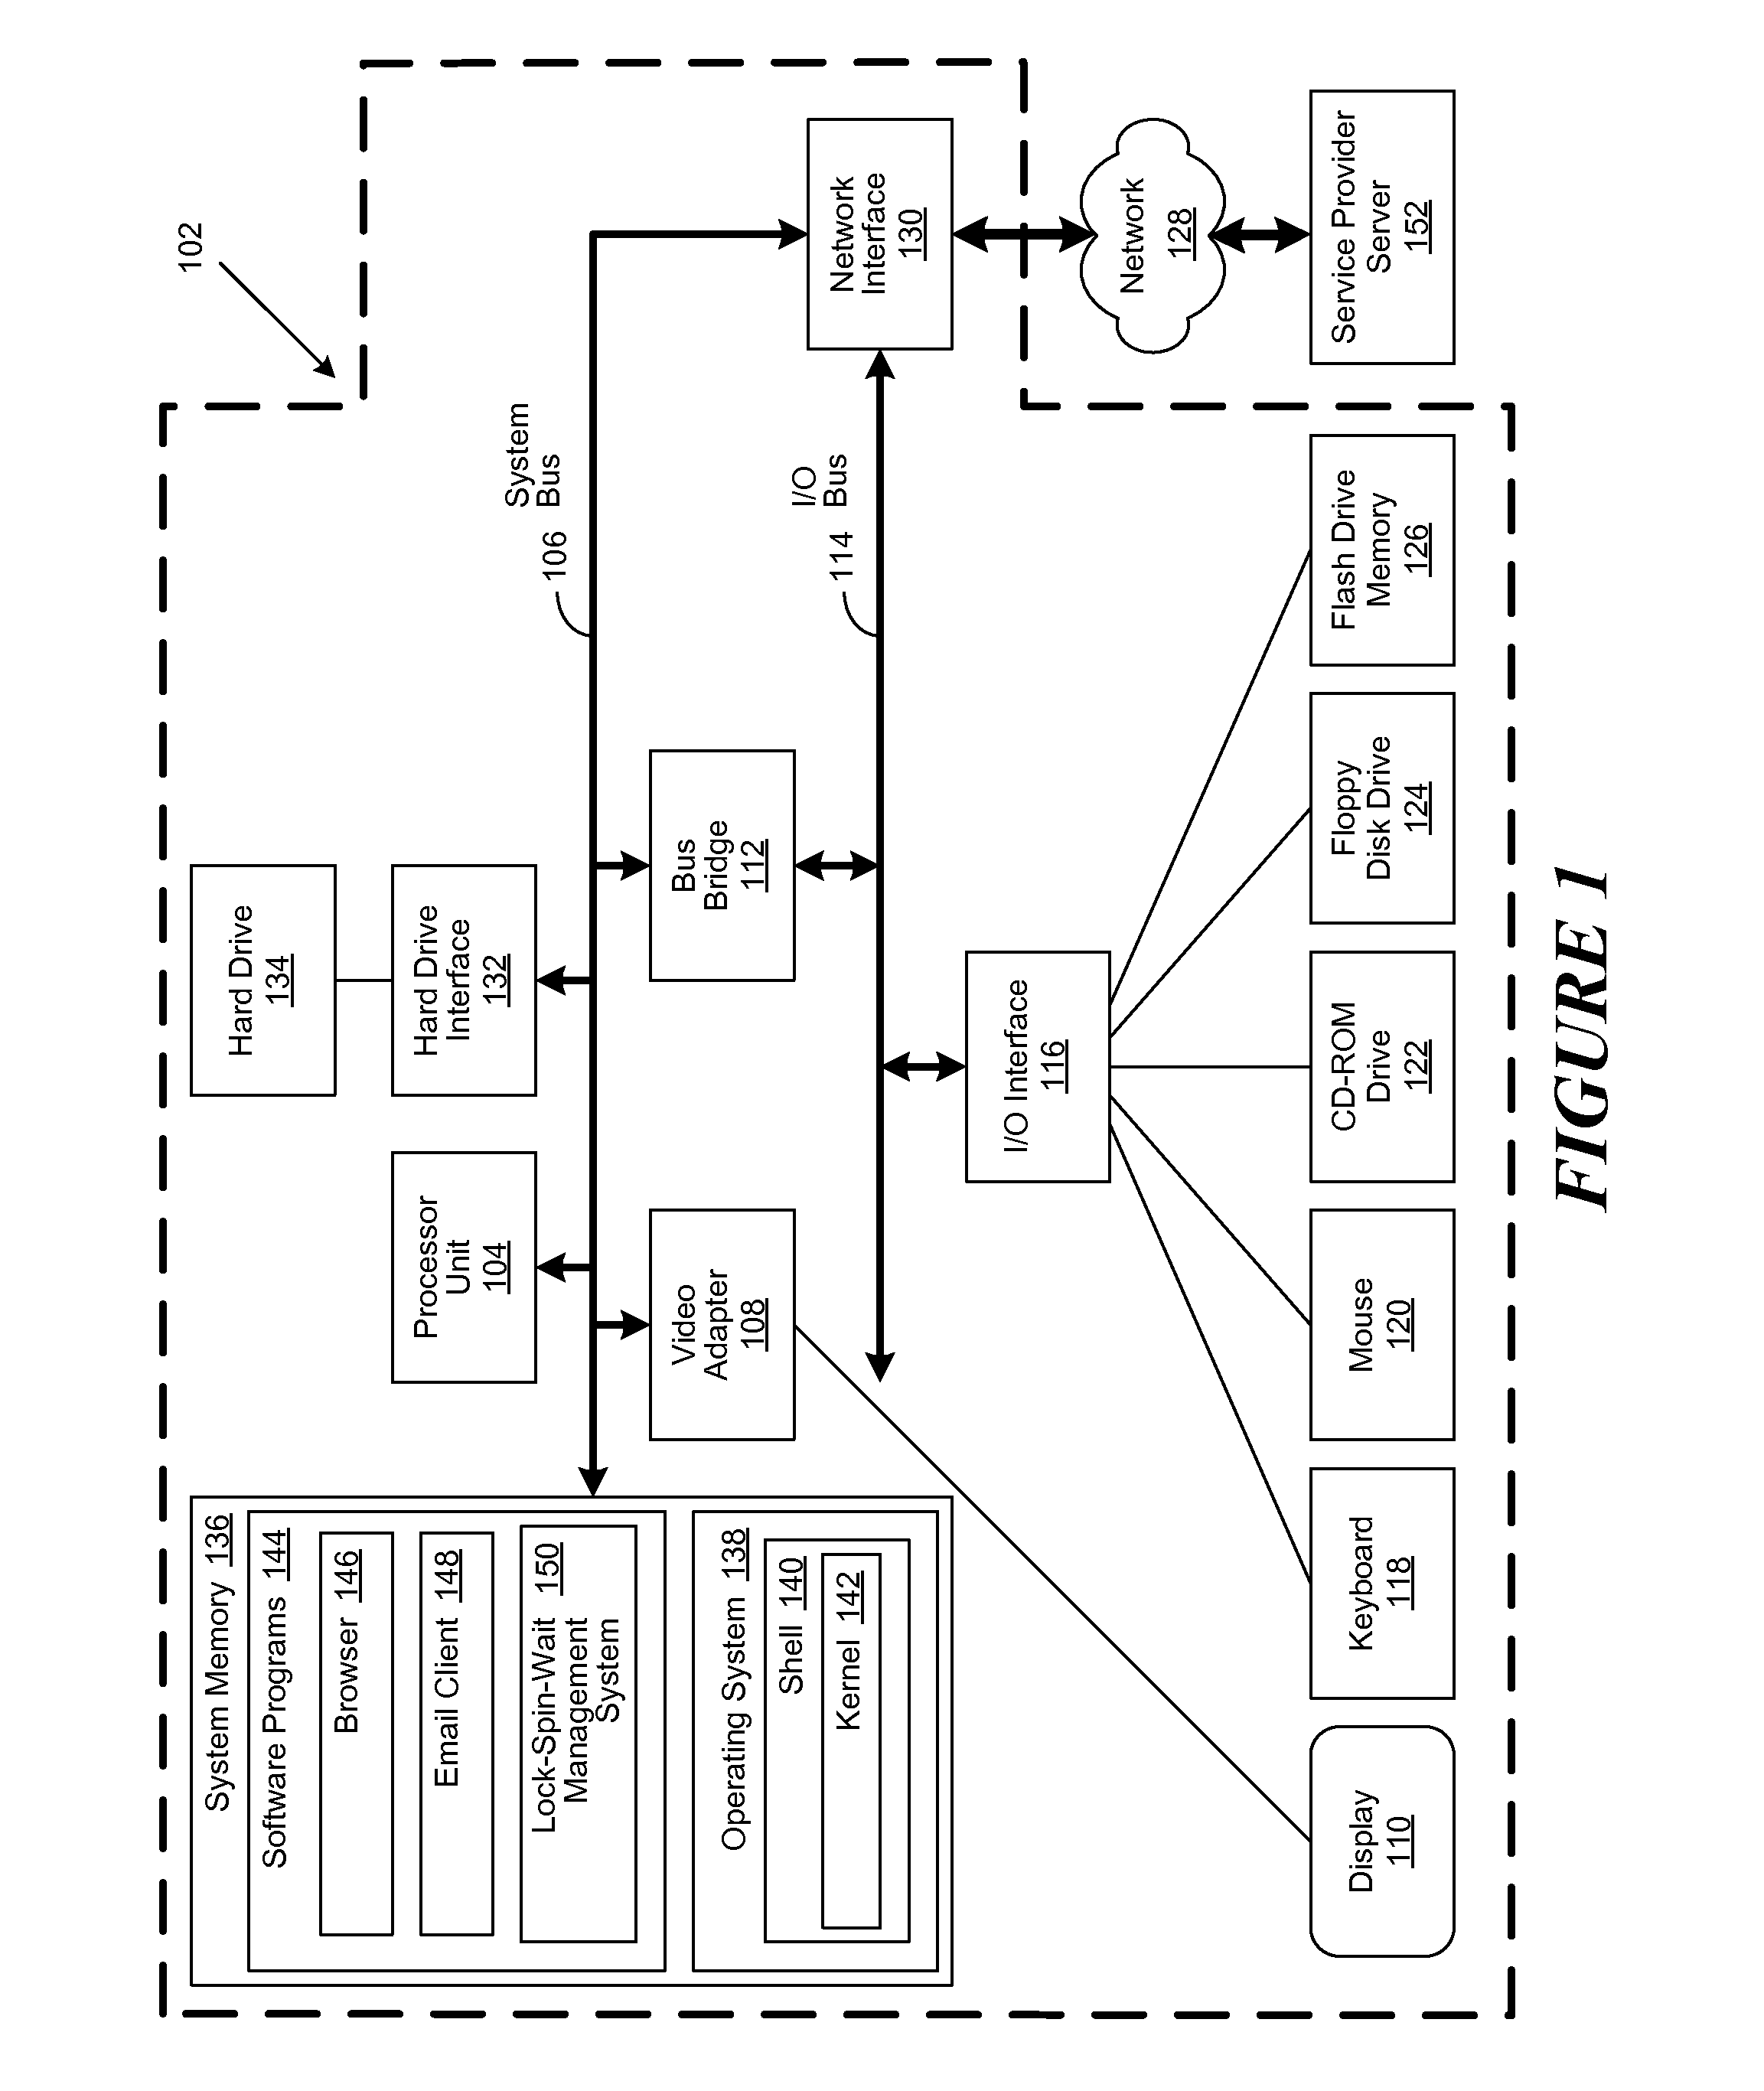 Lock Spin Wait Operation for Multi-Threaded Applications in a Multi-Core Computing Environment